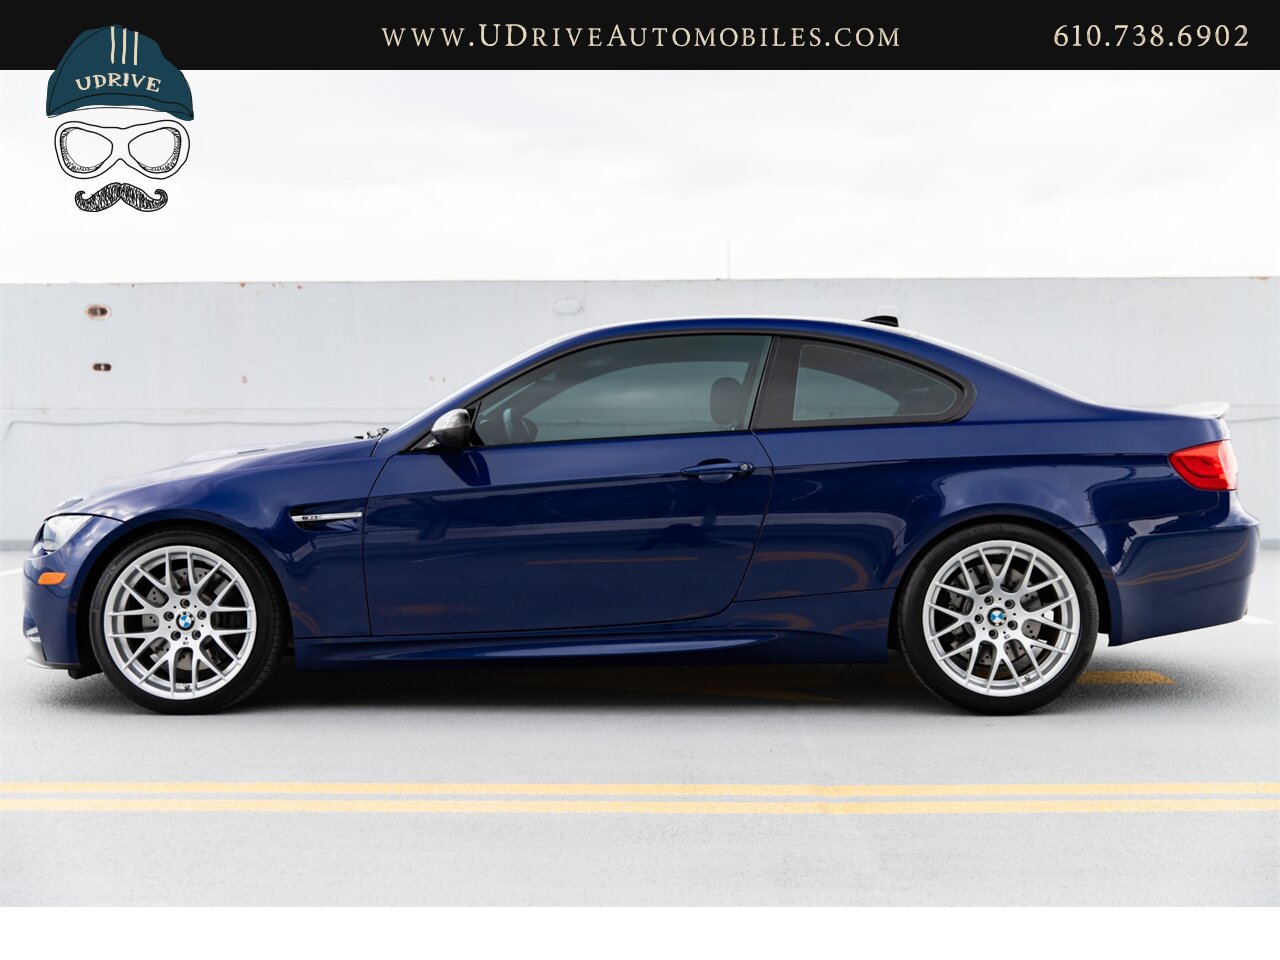 2011 BMW M3 E92 6 Speed Manual Competition Pkg Interlagos Blue  16k Miles Nav PDC EDC Comf Acc - Photo 8 - West Chester, PA 19382